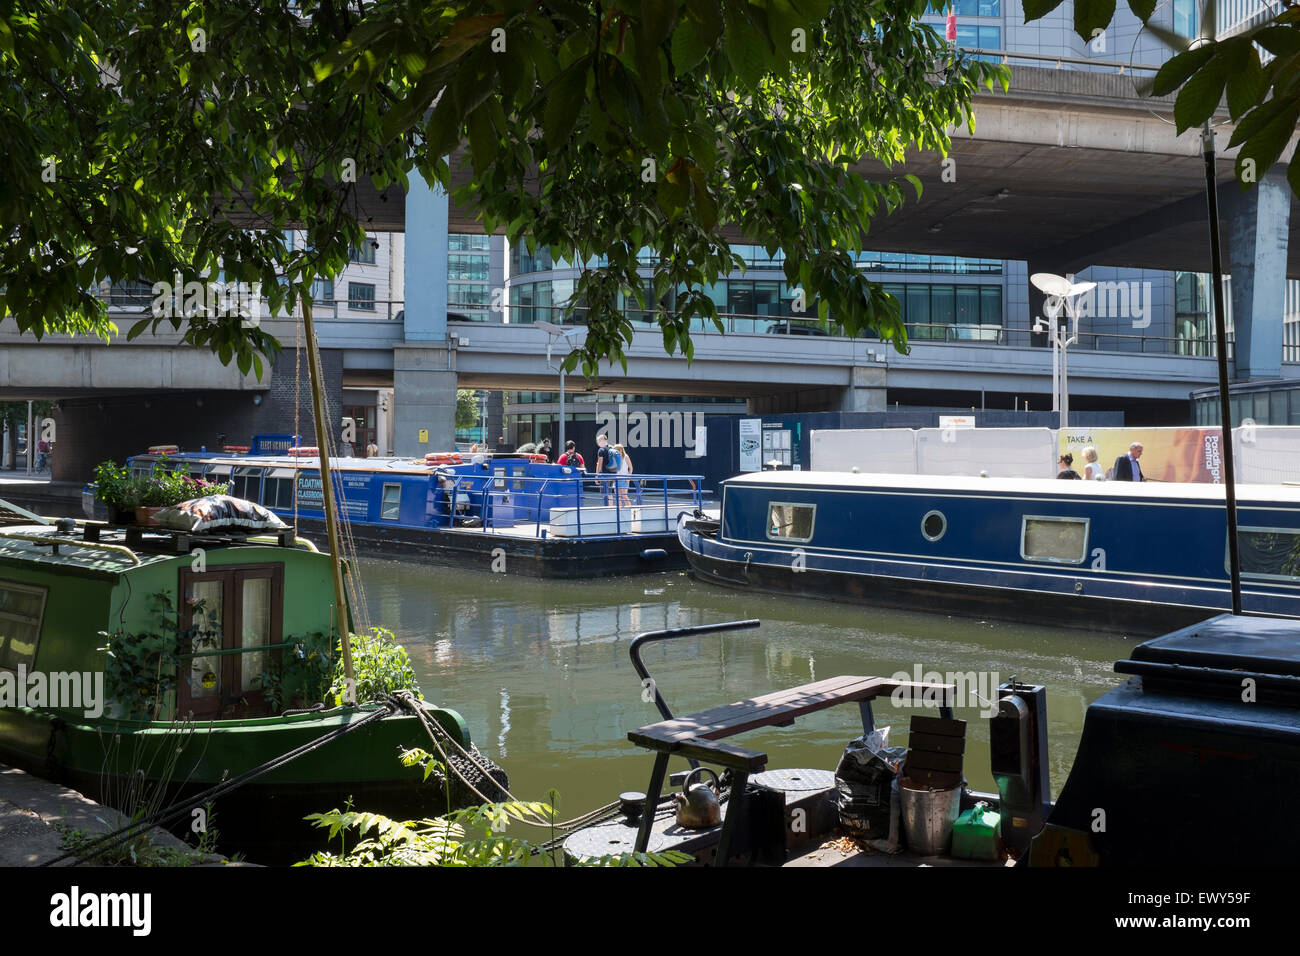 General view of the Paddington Basin in West London by the Grand Union Canal Stock Photo